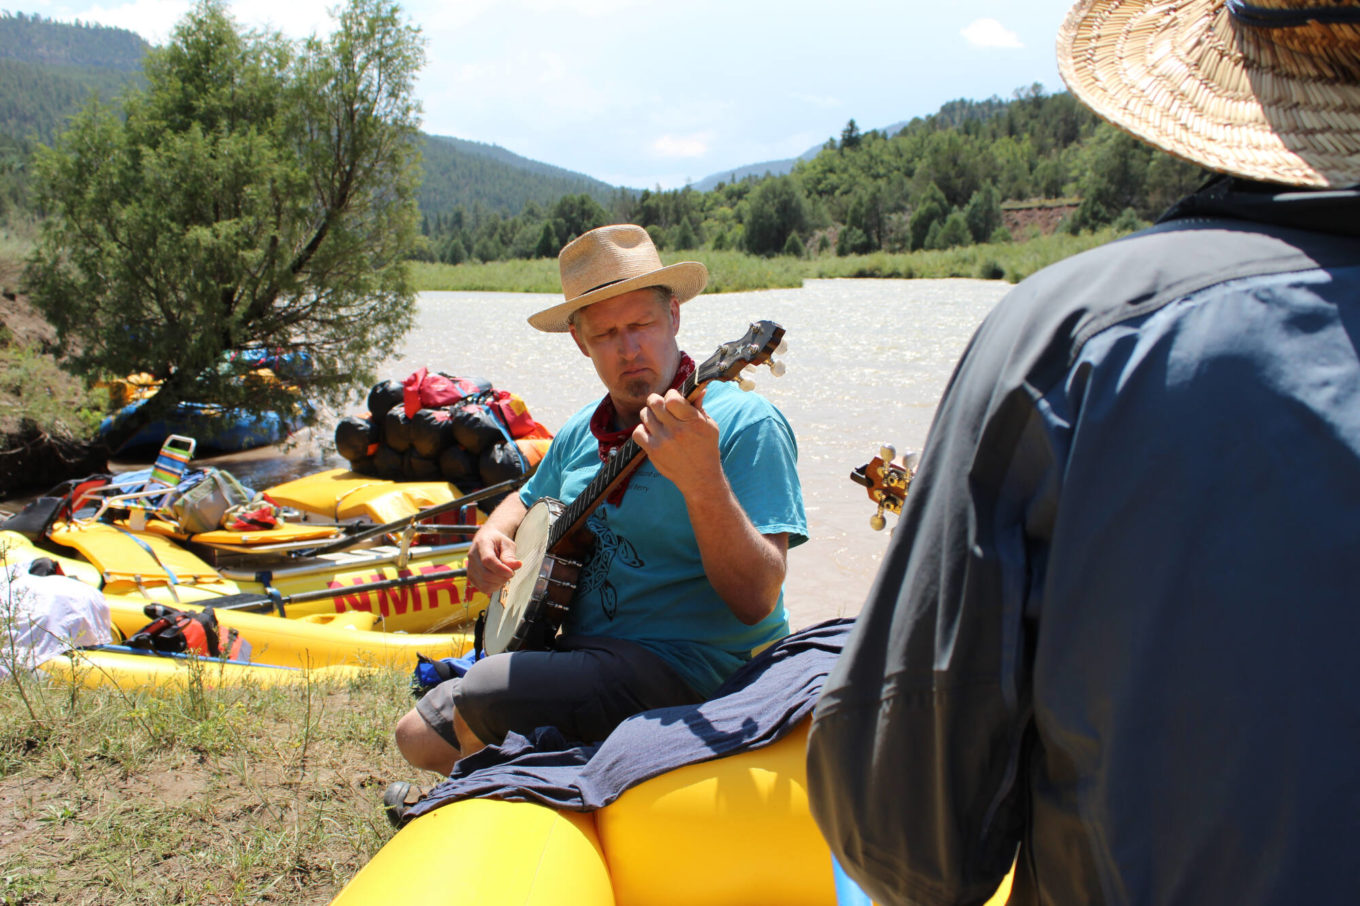 Playing banjo during new mexico music trip on the river